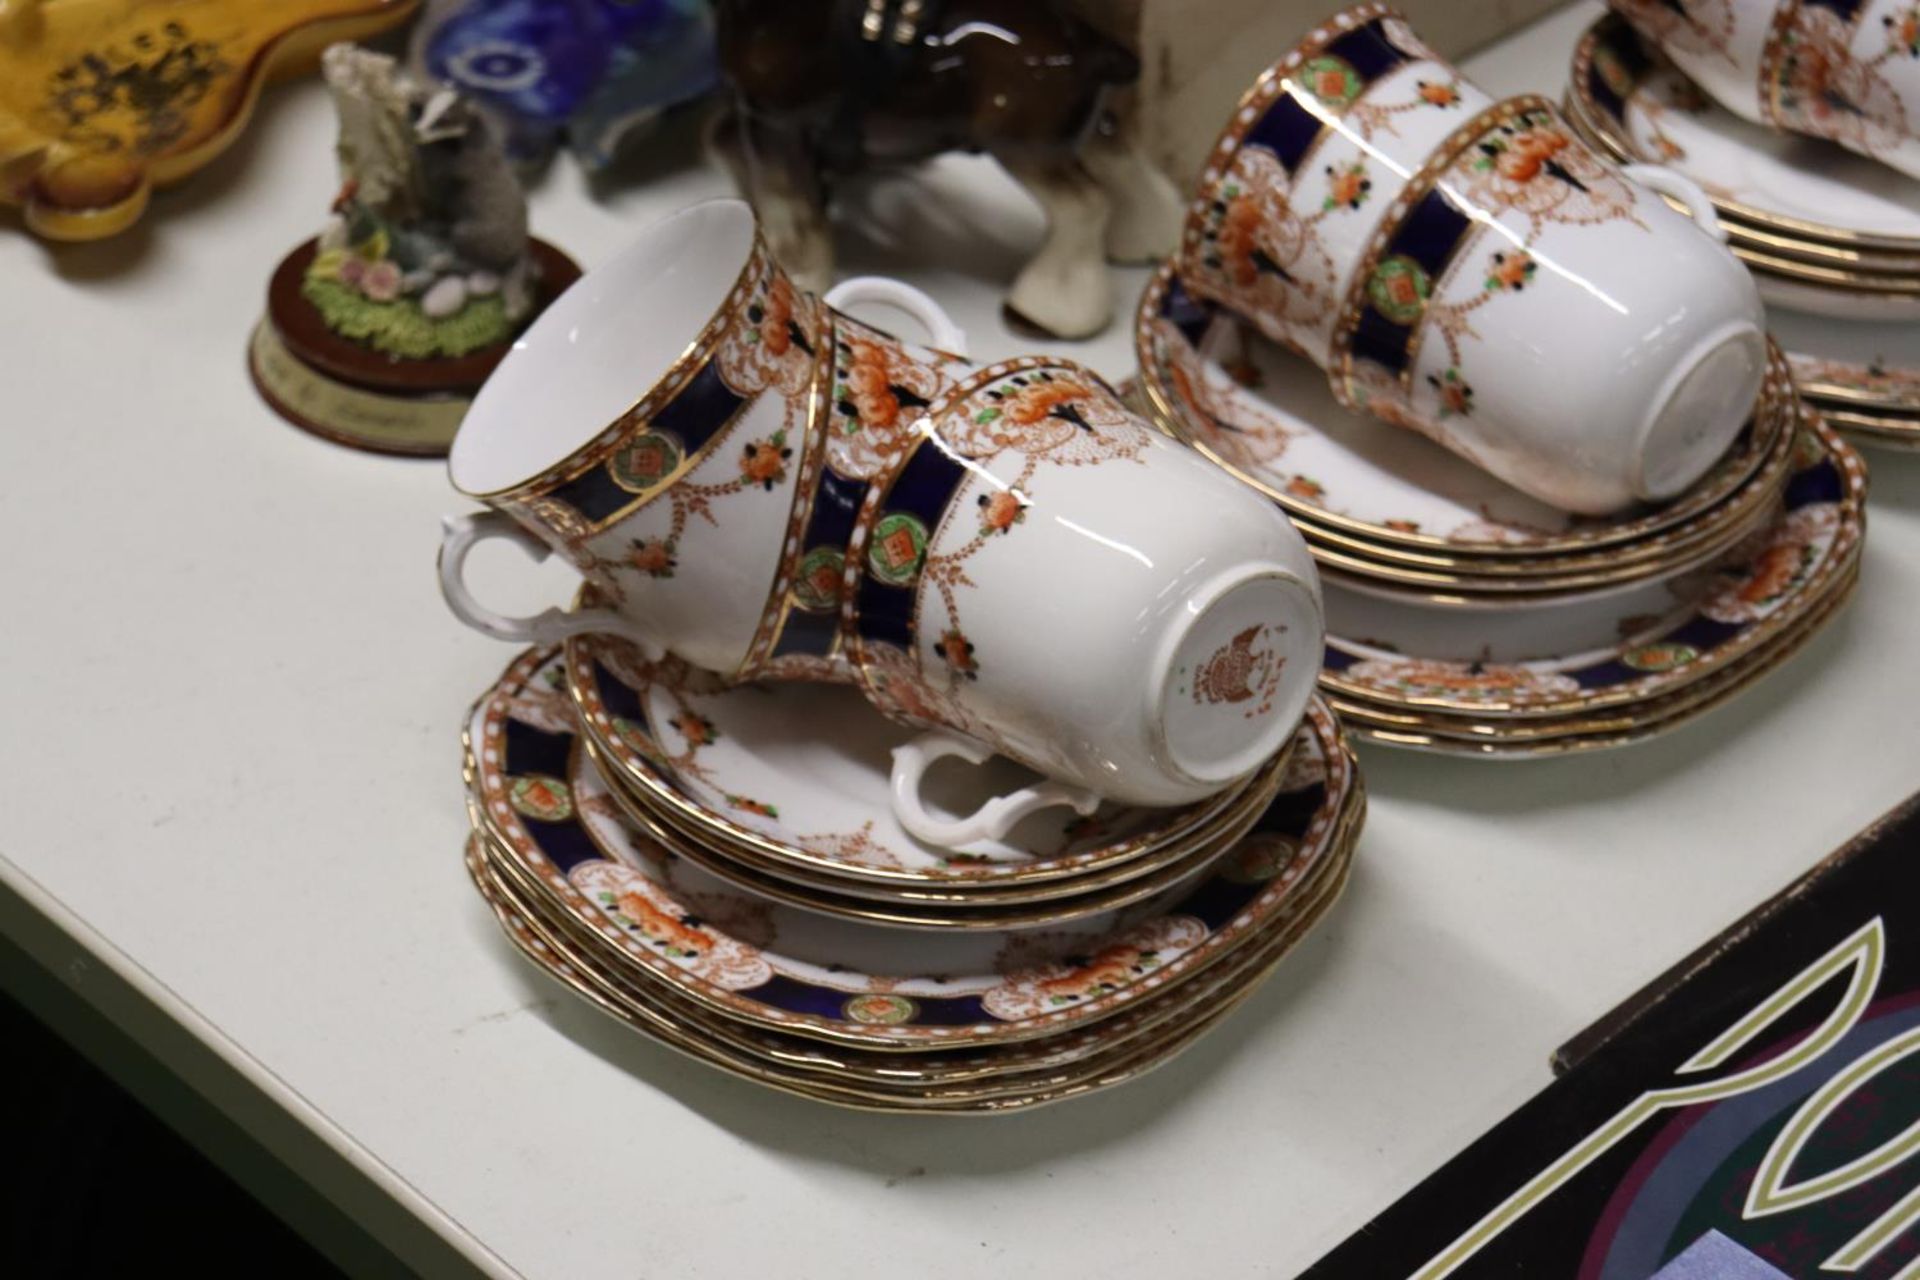 A VINTAGE CHINA TEASET TO INCLUDE CAKE PLATES, A SUGAR BOWL, CREAM JUG, CUPS, SAUCERS AND SIDE - Image 2 of 5